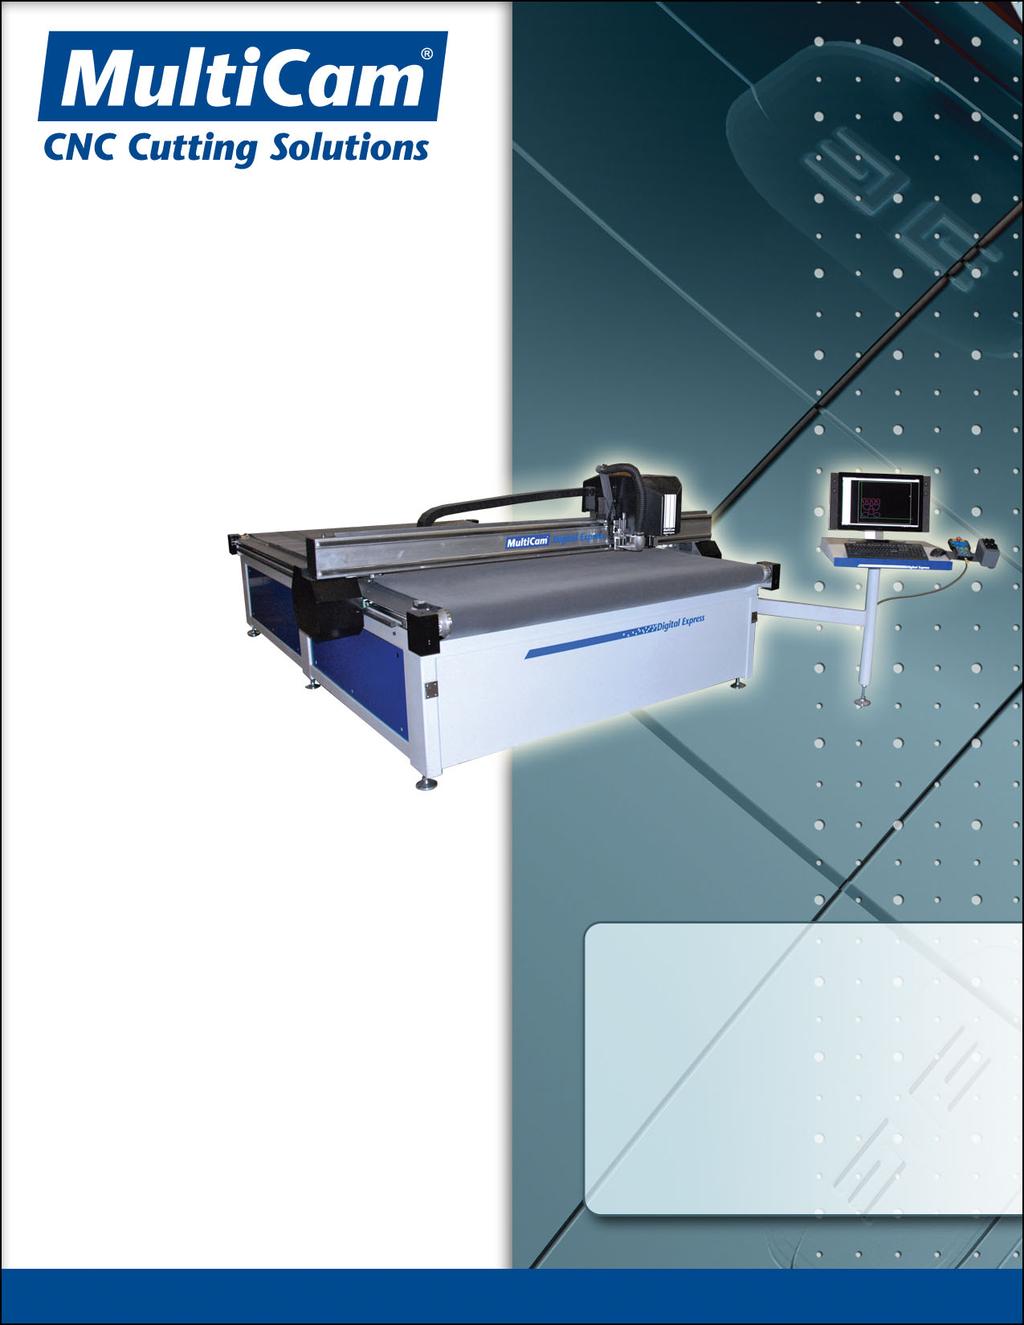 MultiCam Digital Express Feature and Specification Guide High-Speed Digital Finishing at 7000 Inches Per Minute!